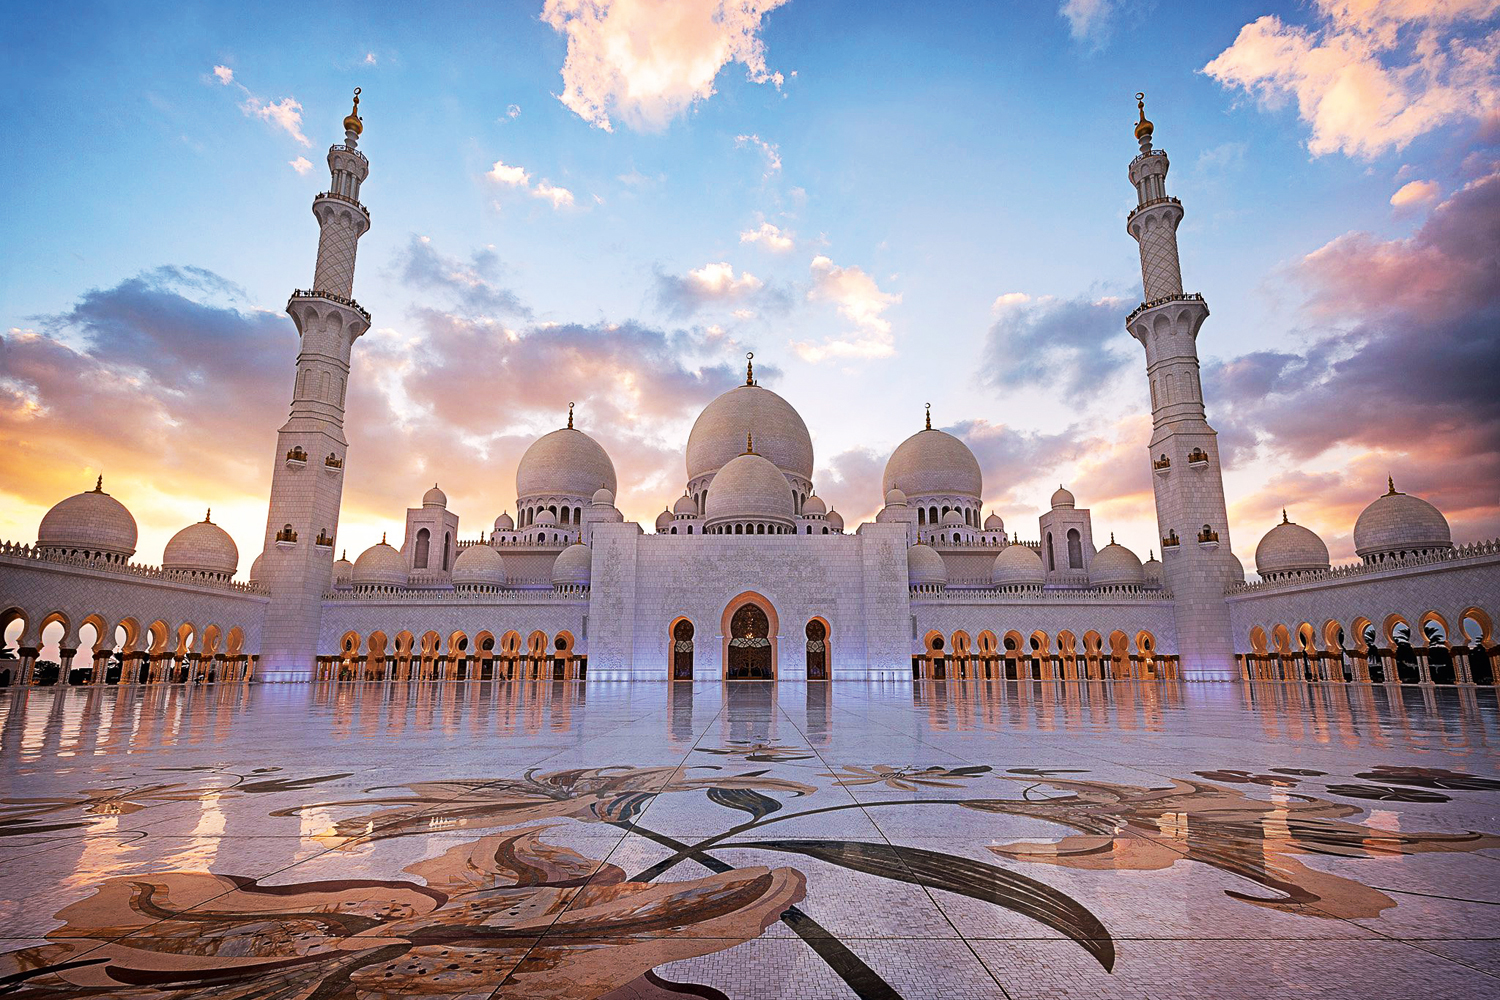 Do Yourself Proud By Acing This Where Are You Geography Quiz Sheikh Zayed Grand Mosque, Abu Dhabi, United Arab Emirates